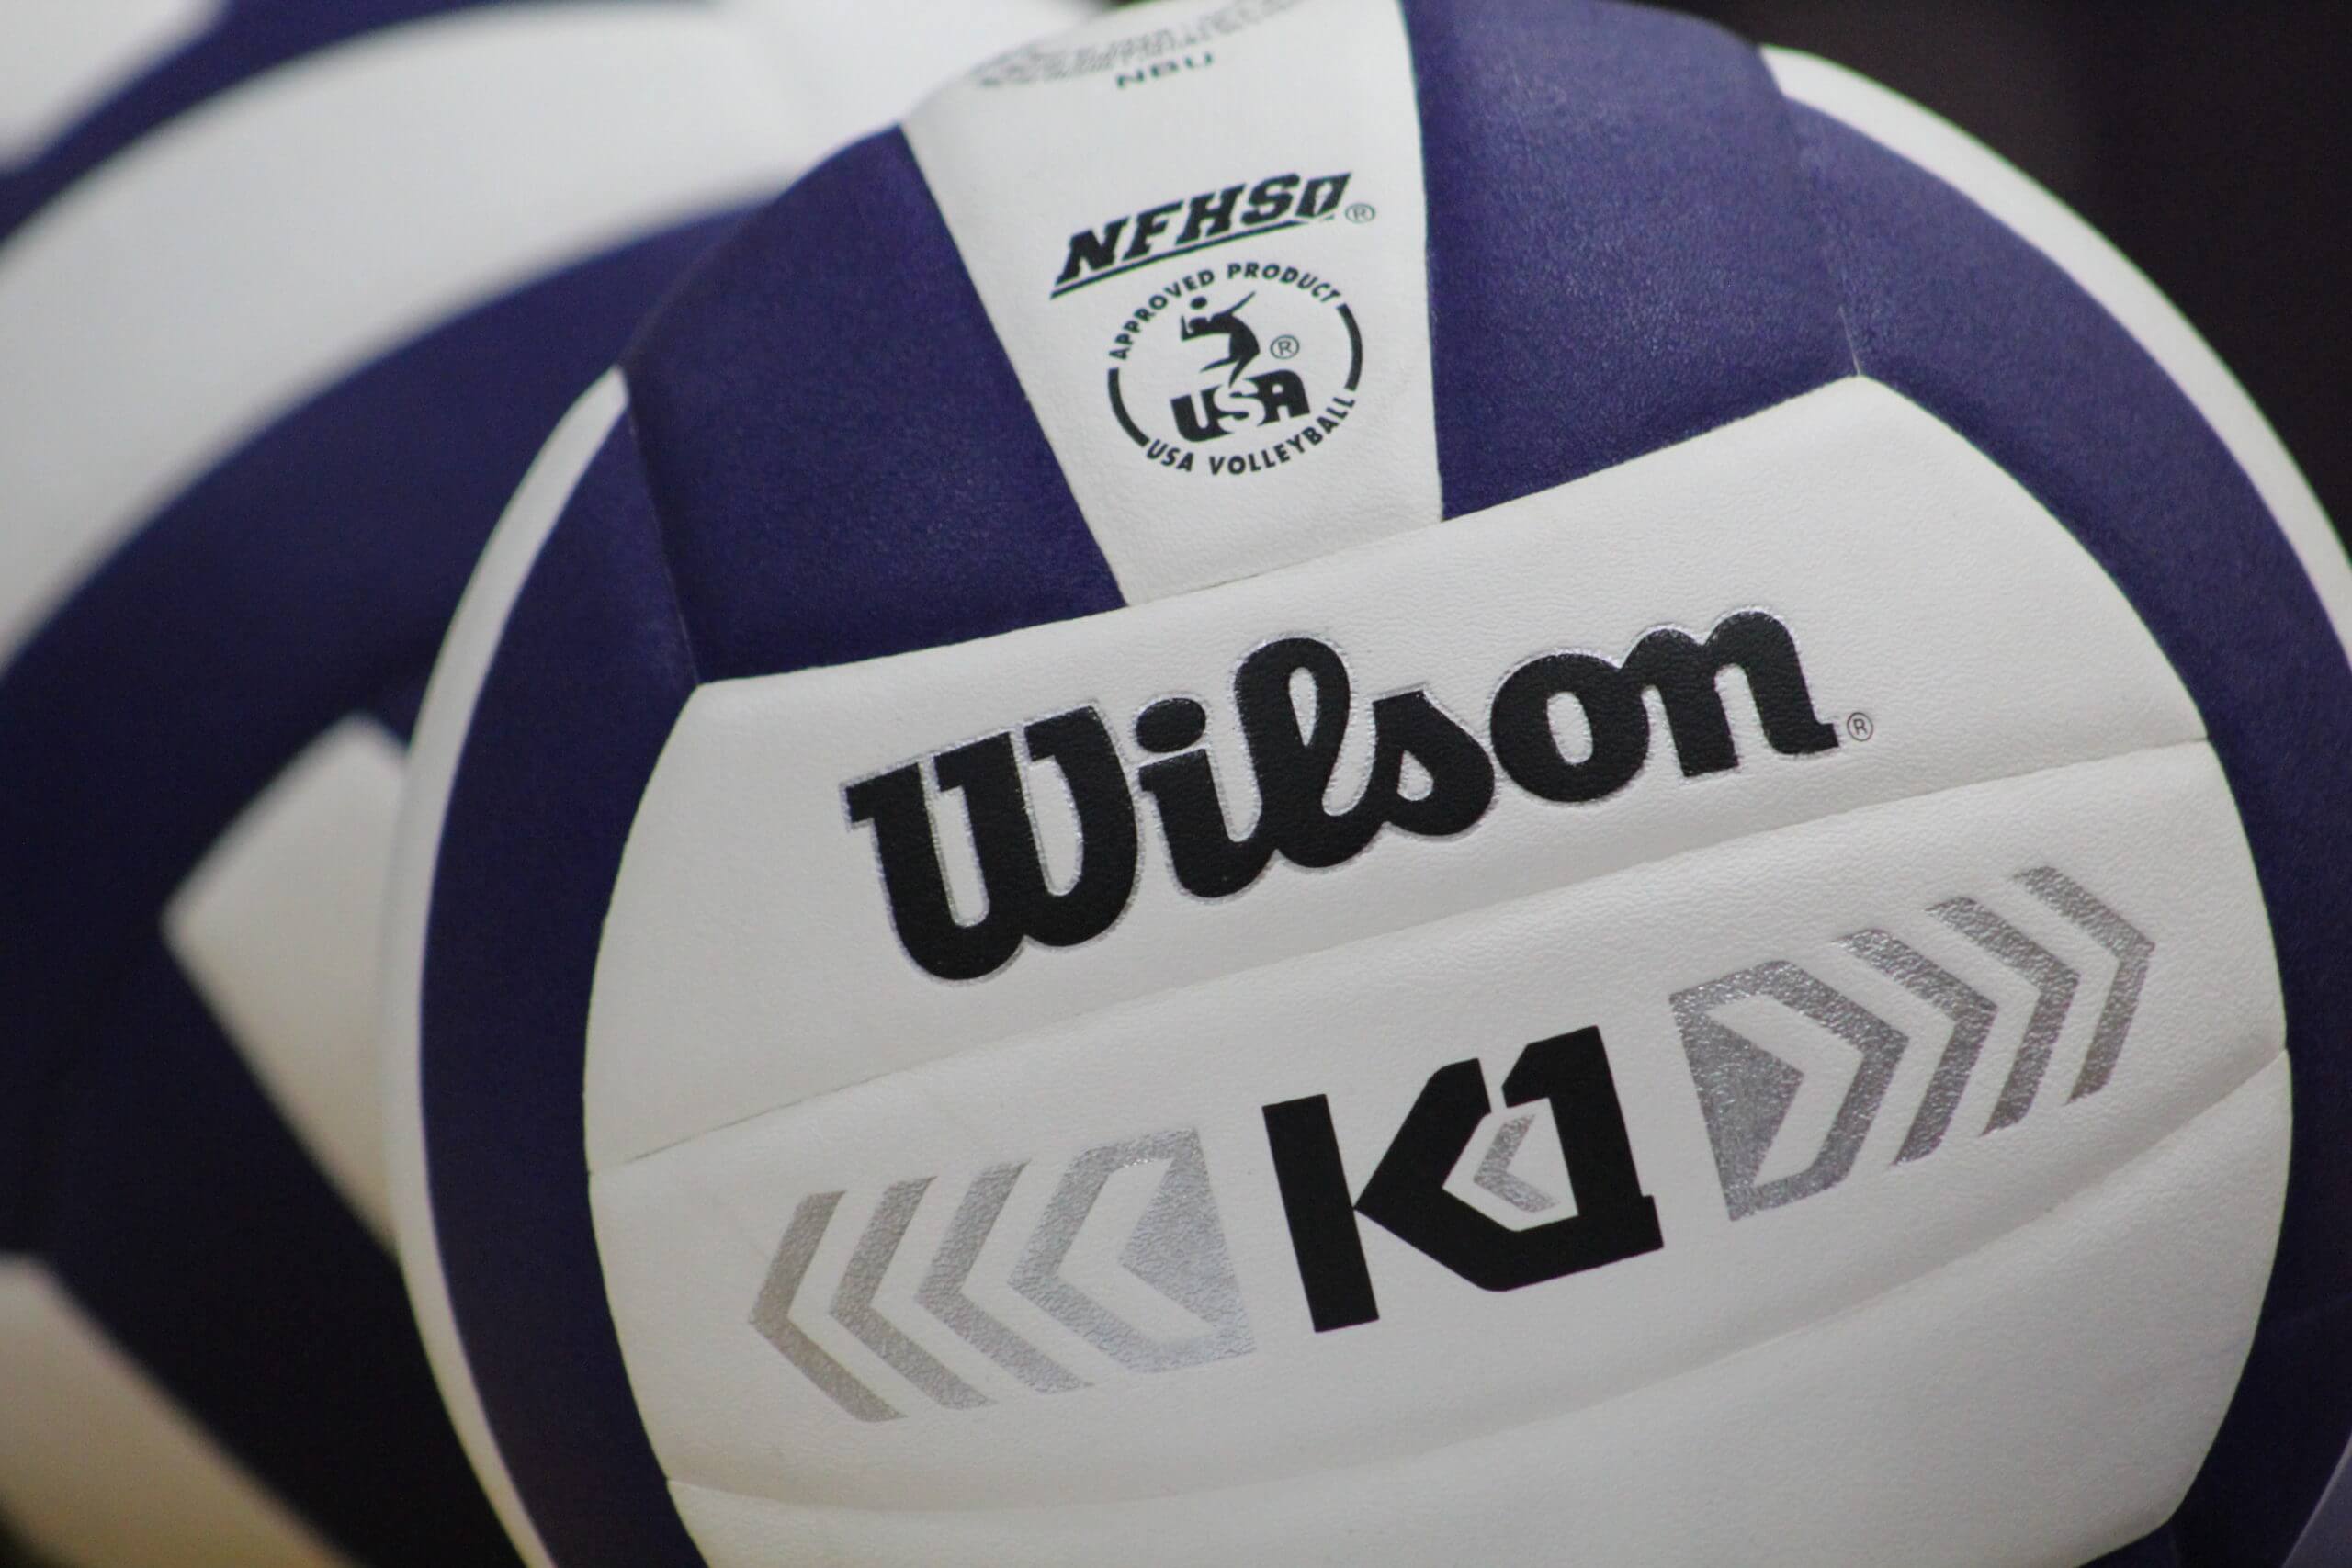 Northwest volleyball earns program's first victory